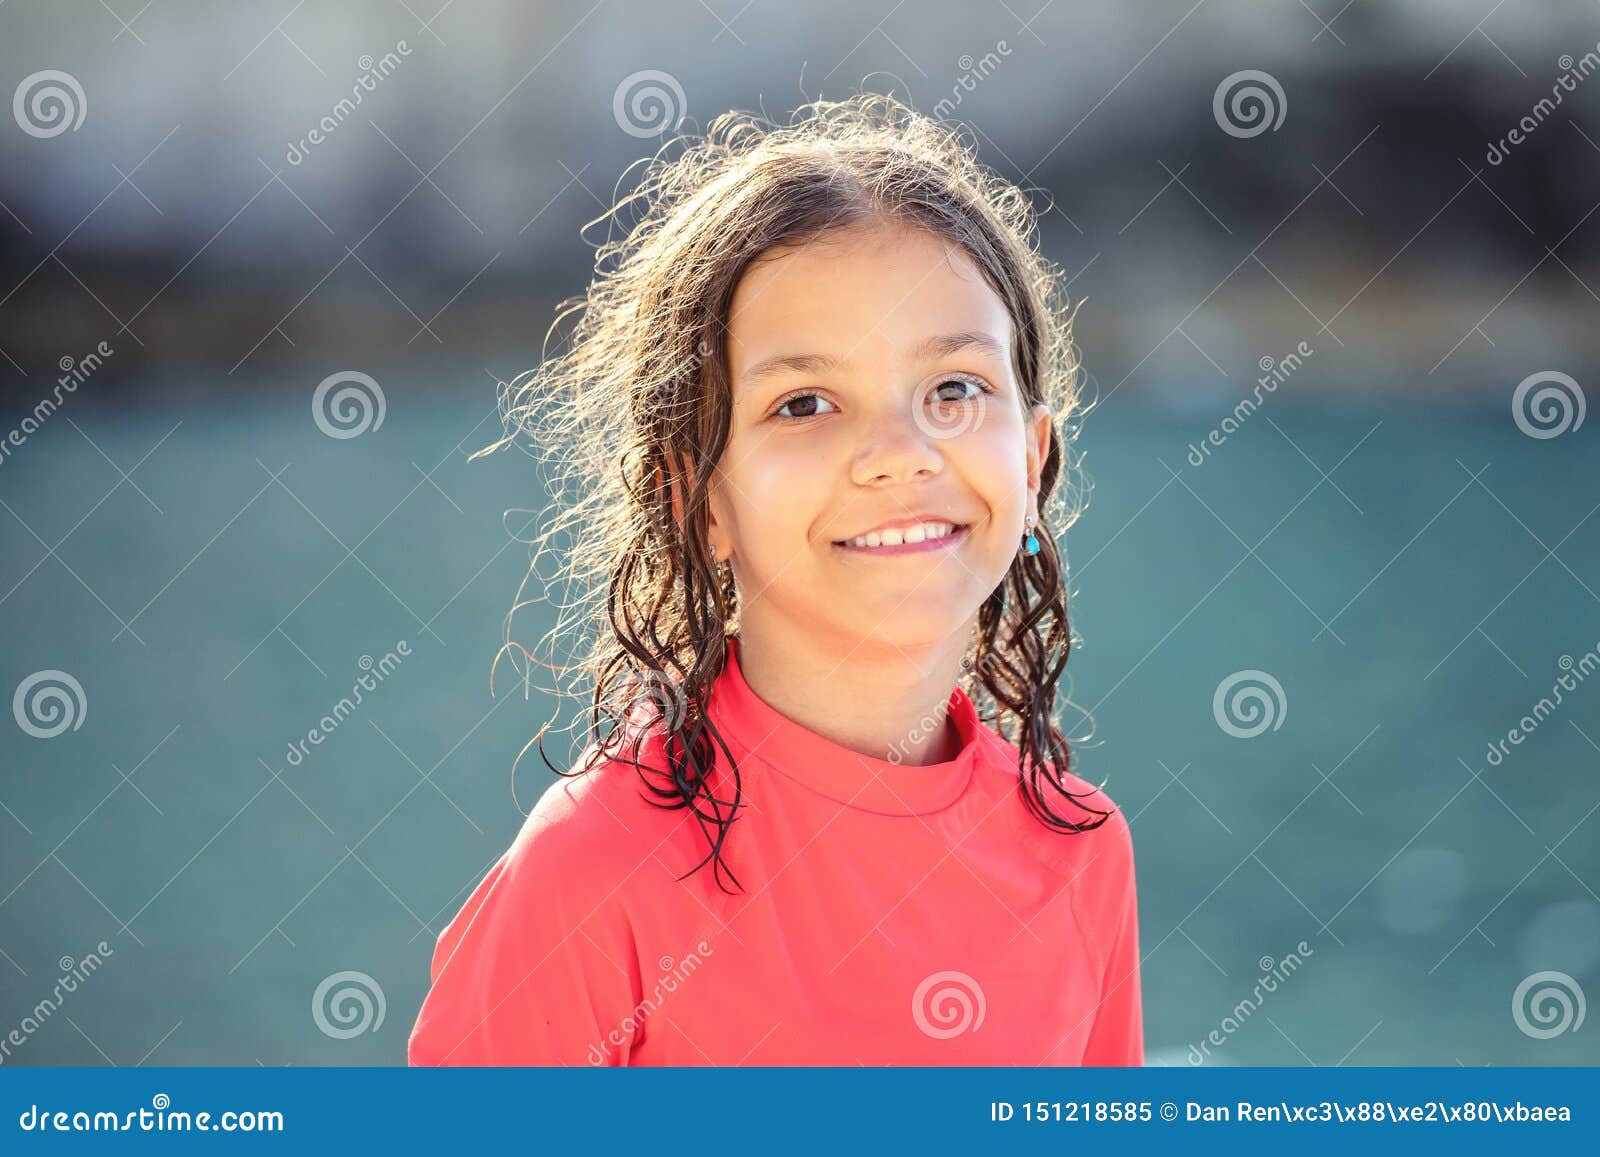 Portrait, Little Girl On Beach, Child Looking, Smiling In 